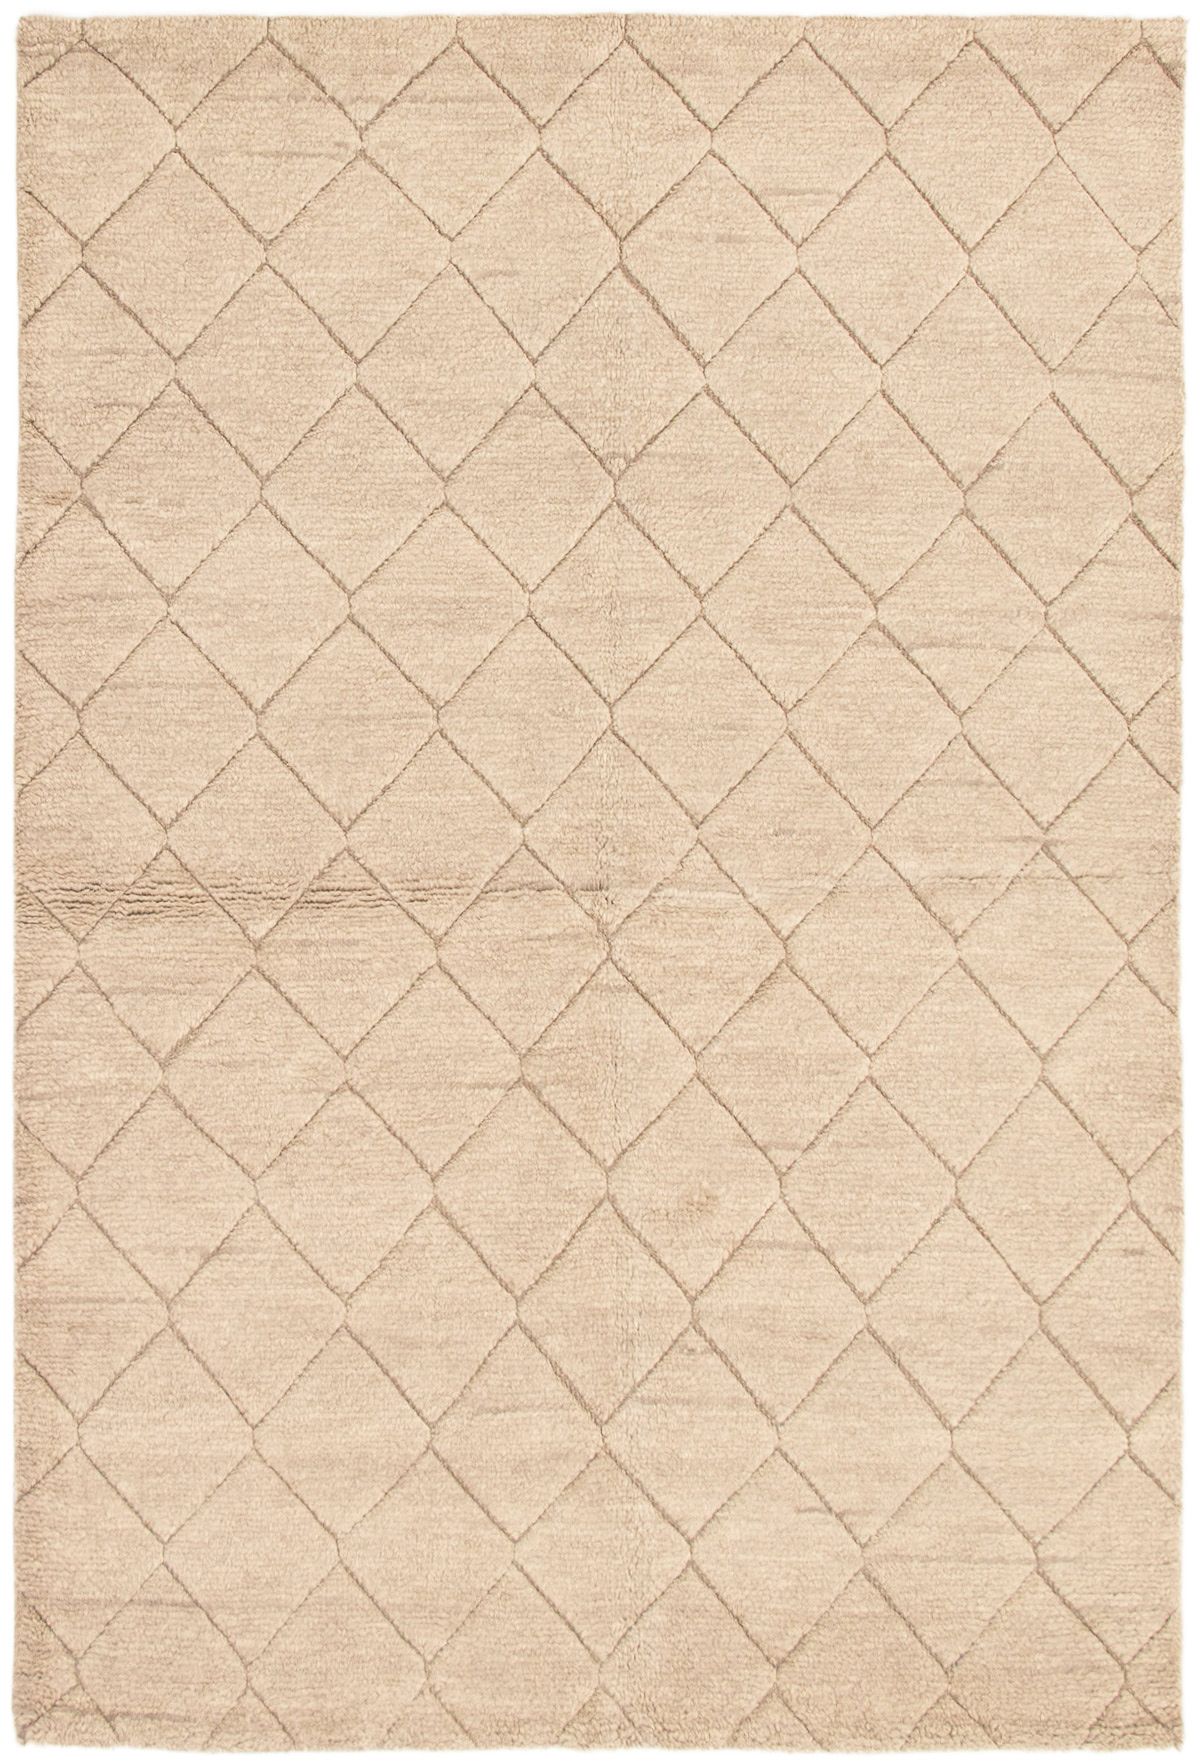 Hand-knotted Arlequin Khaki Wool Rug 6'1" x 8'10" Size: 6'1" x 8'10"  